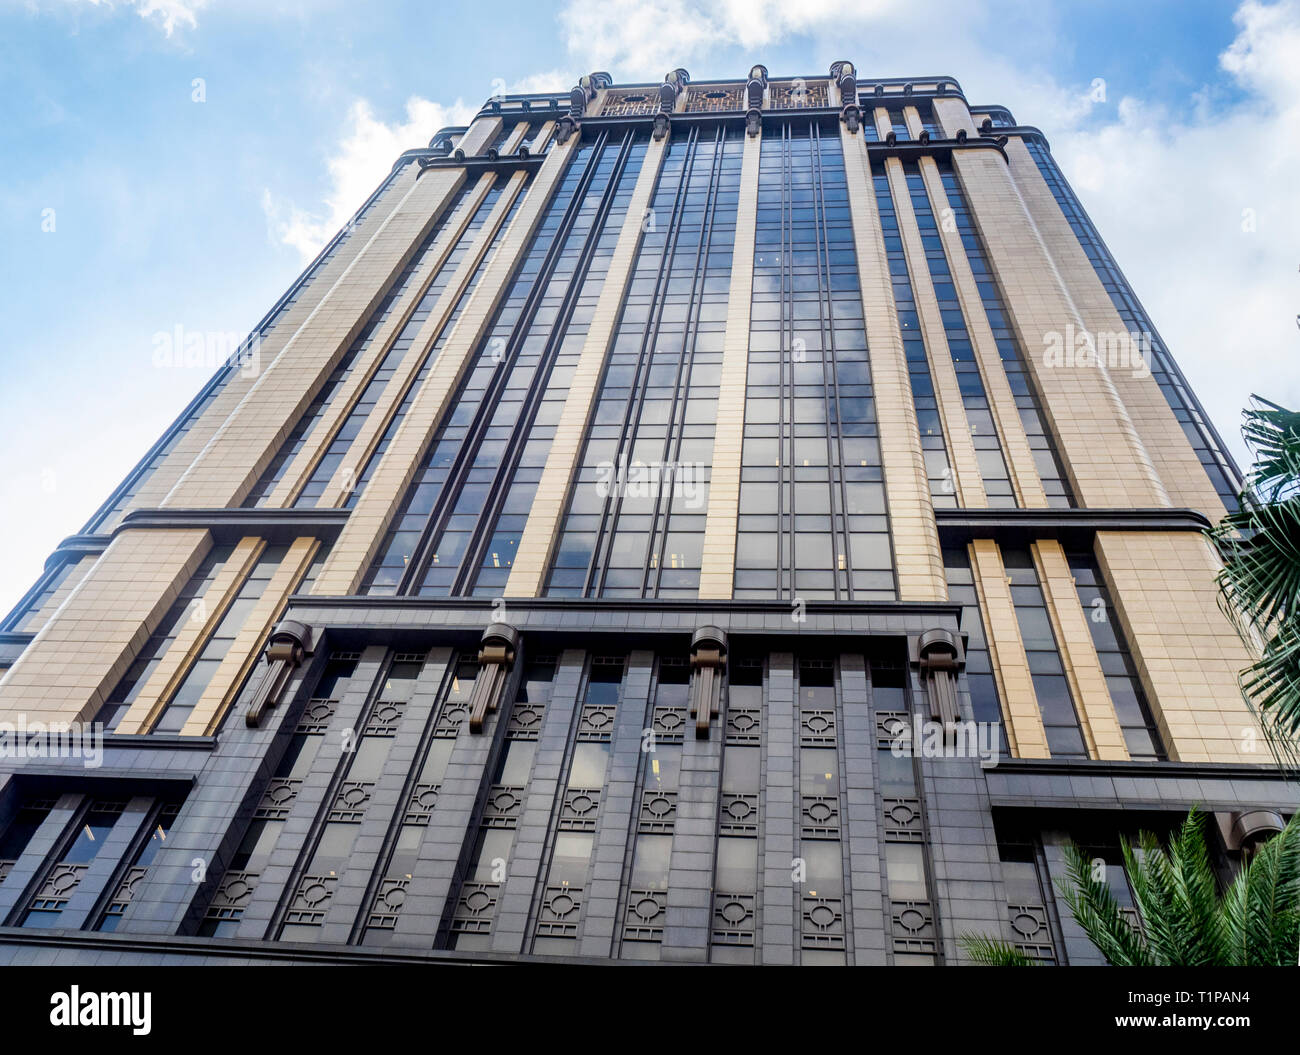 Granite, bronze and glass edifice of the Art Deco Style Gotham Building, or Parkview Square, in Bras Basah Singapore. Stock Photo